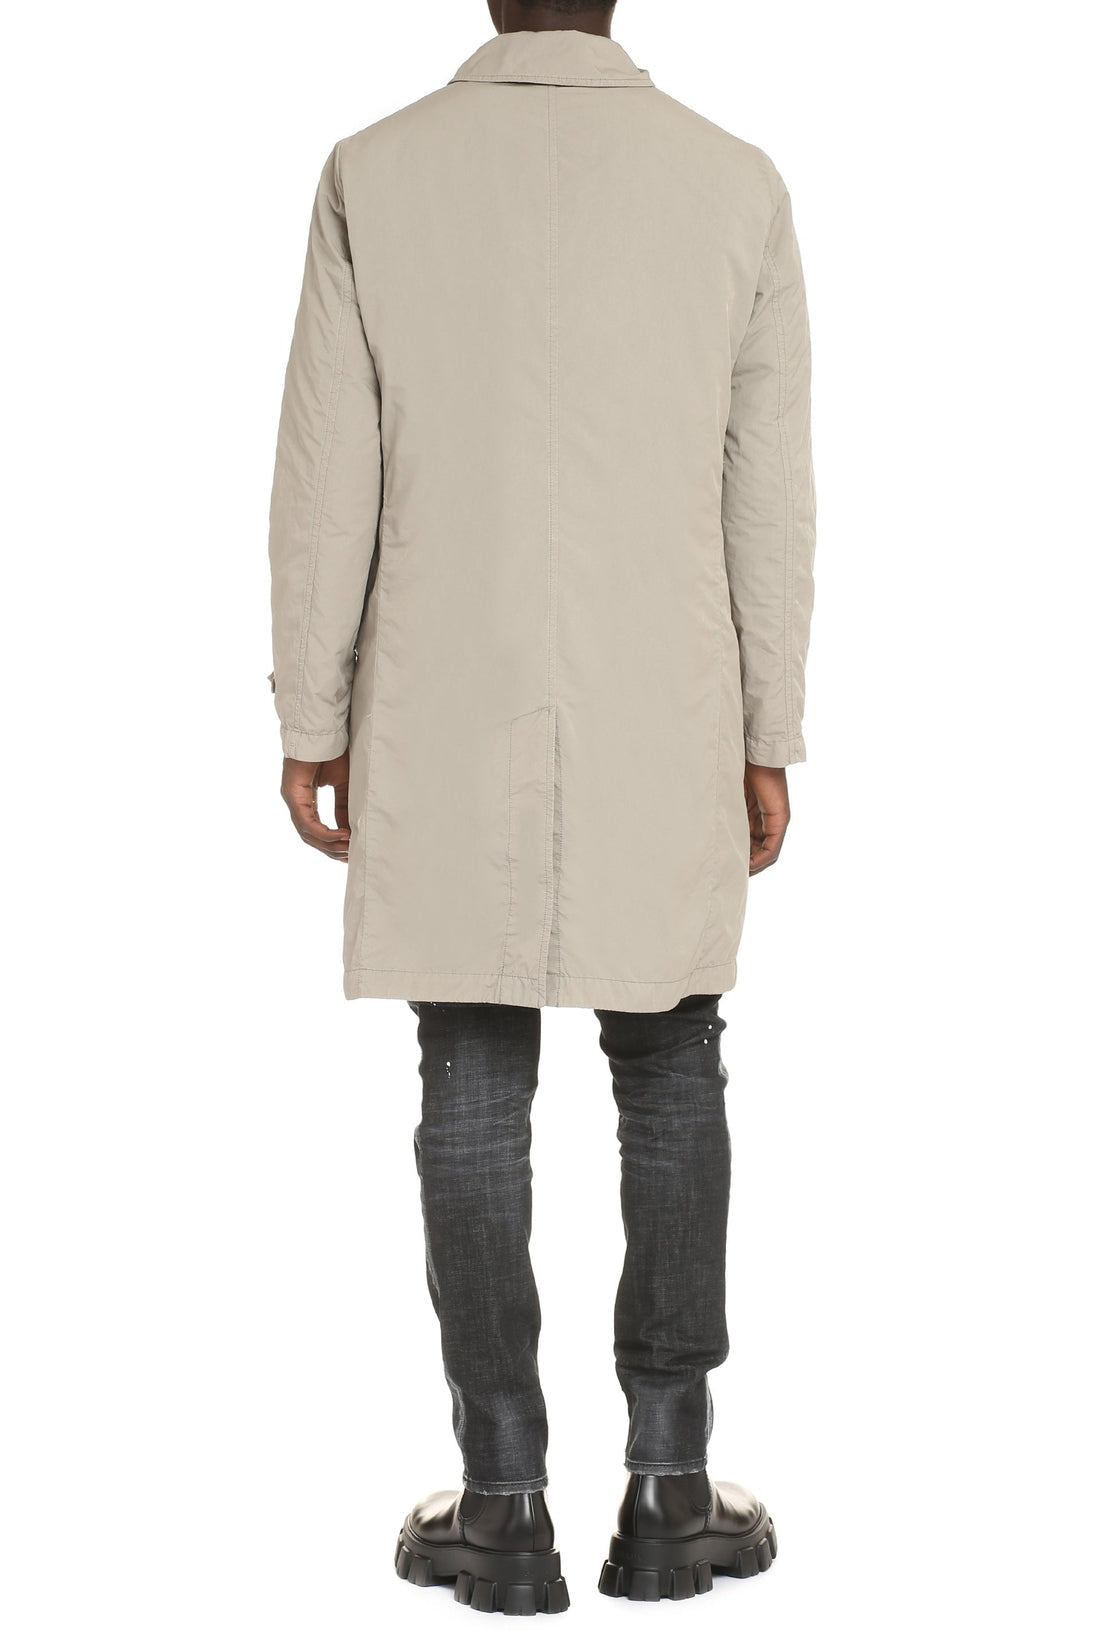 Aspesi-OUTLET-SALE-Trench coat with internal down jacket-ARCHIVIST